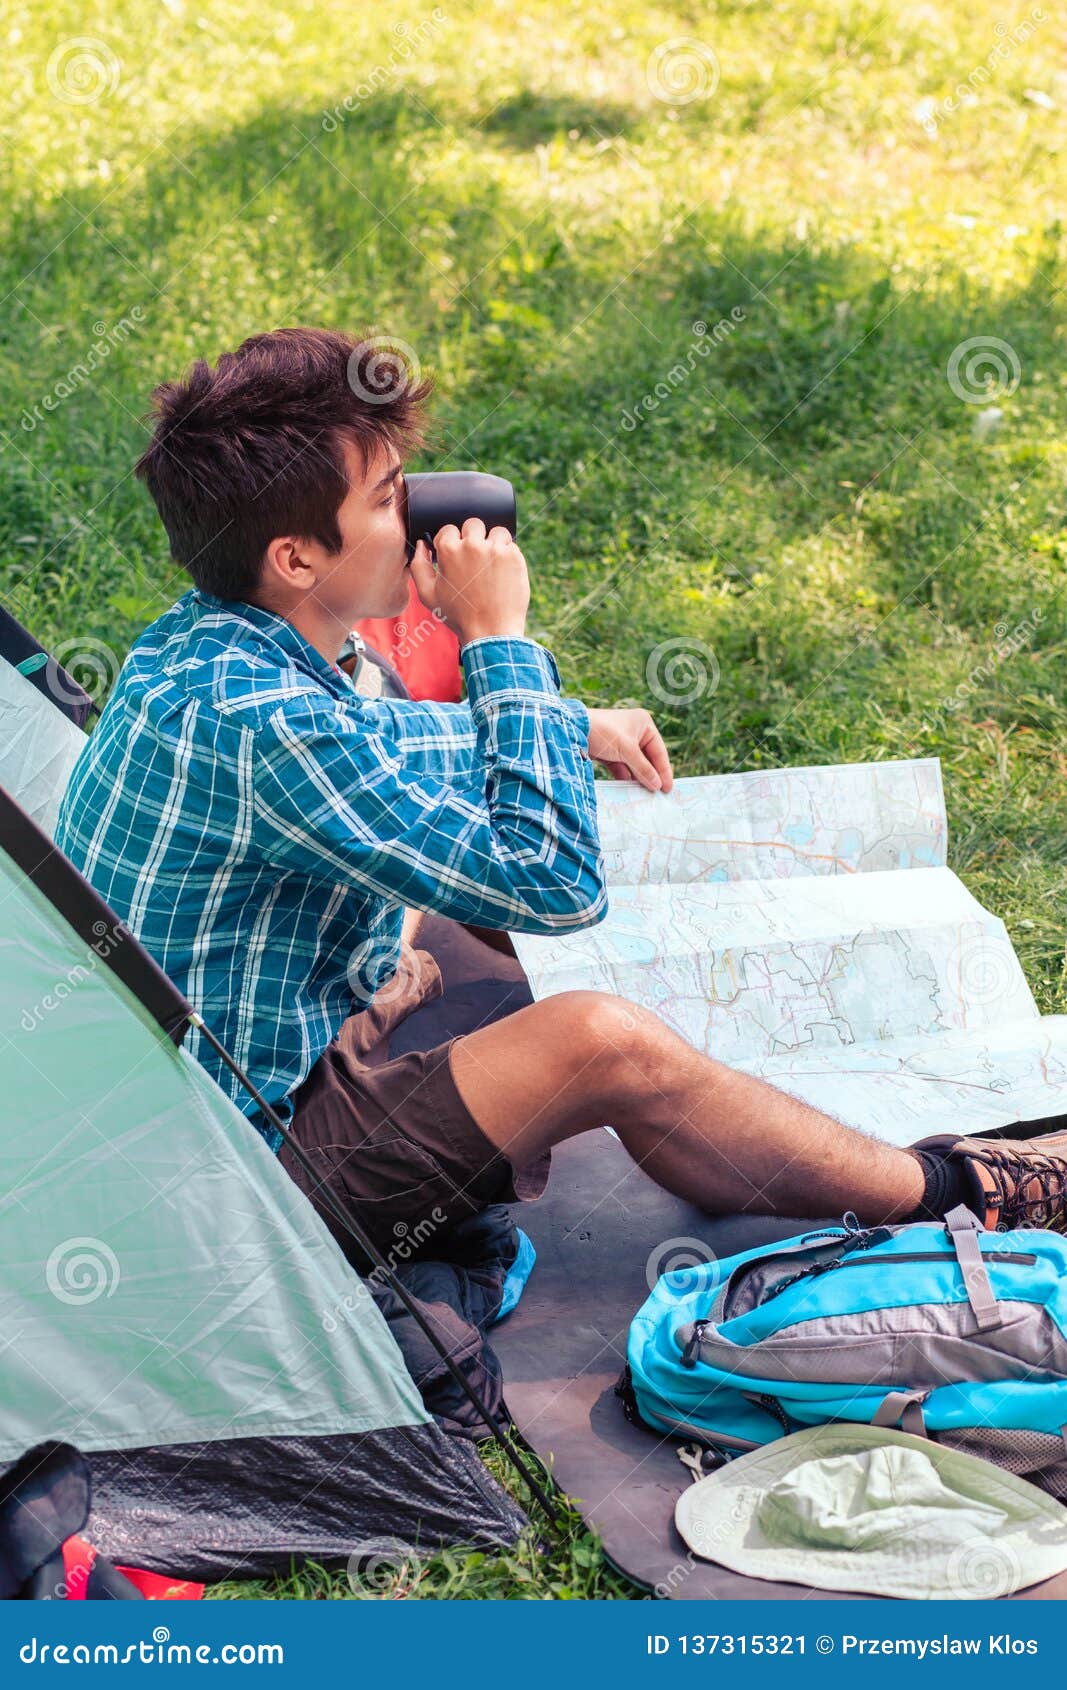 Spending a Vacation on Camping Stock Image - Image of sitting, tent ...